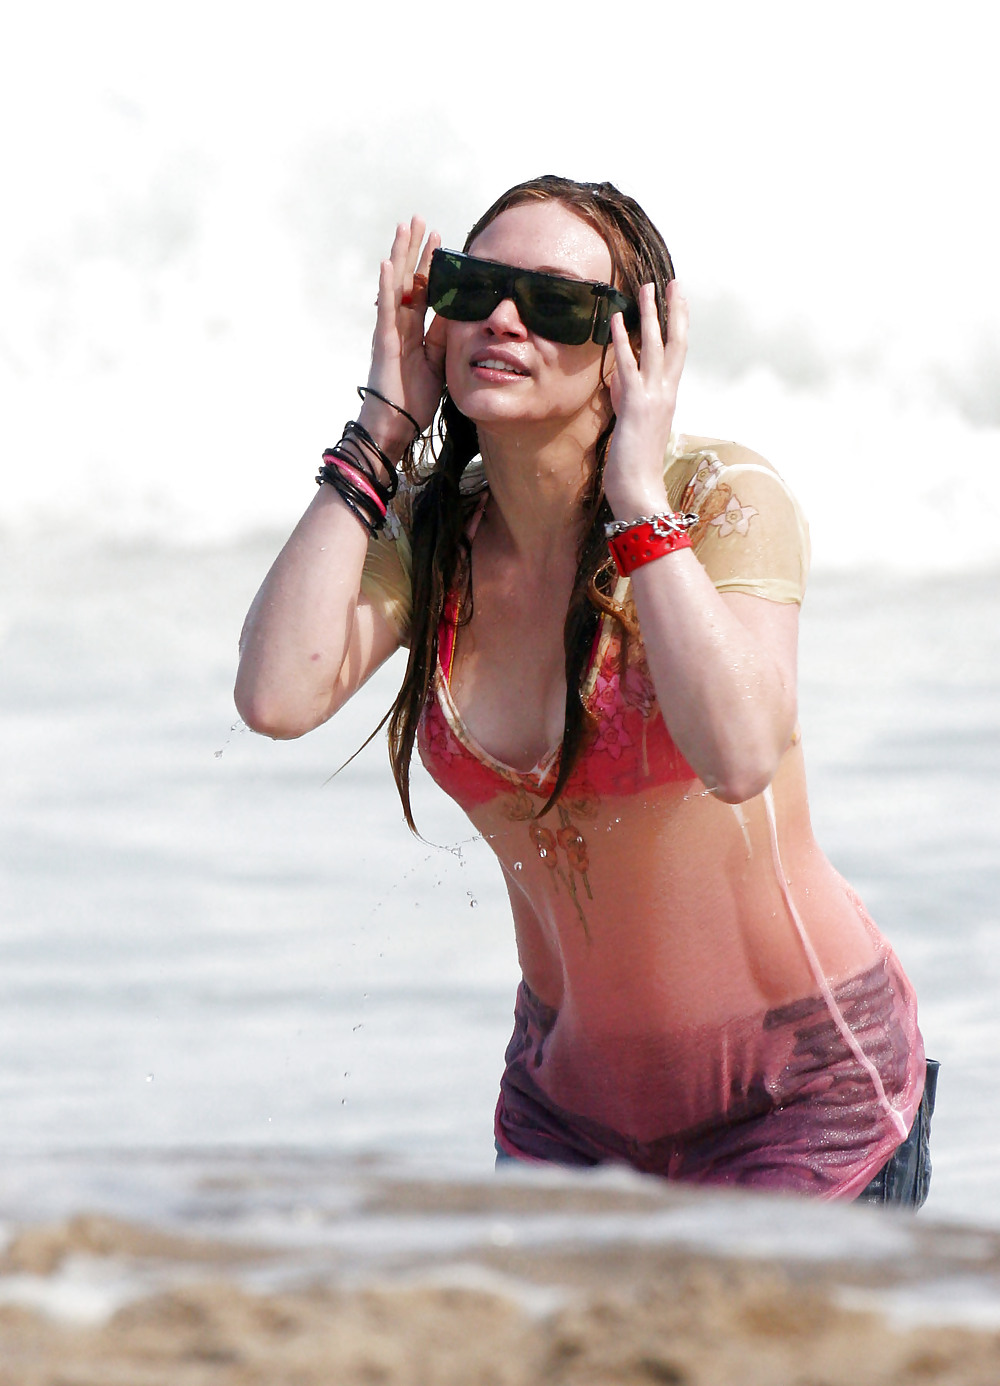 Hilary Duff at the Beach playing around in a wet shirt #7220823